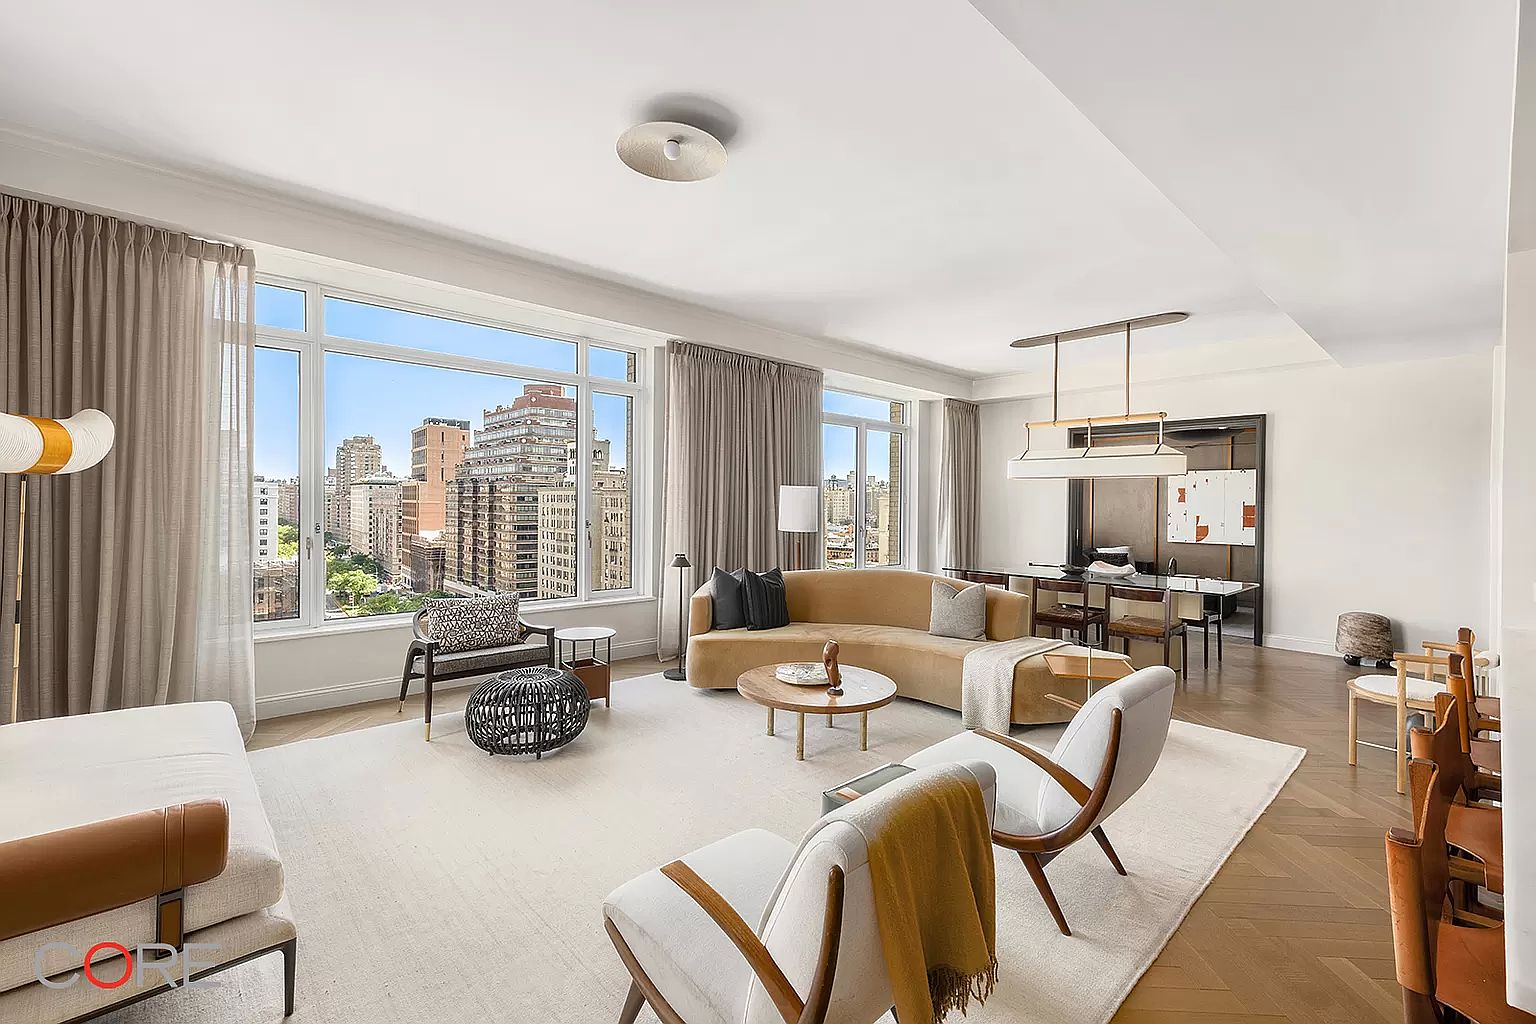 250 W 81st St #15B, New York, NY 10024 | Zillow